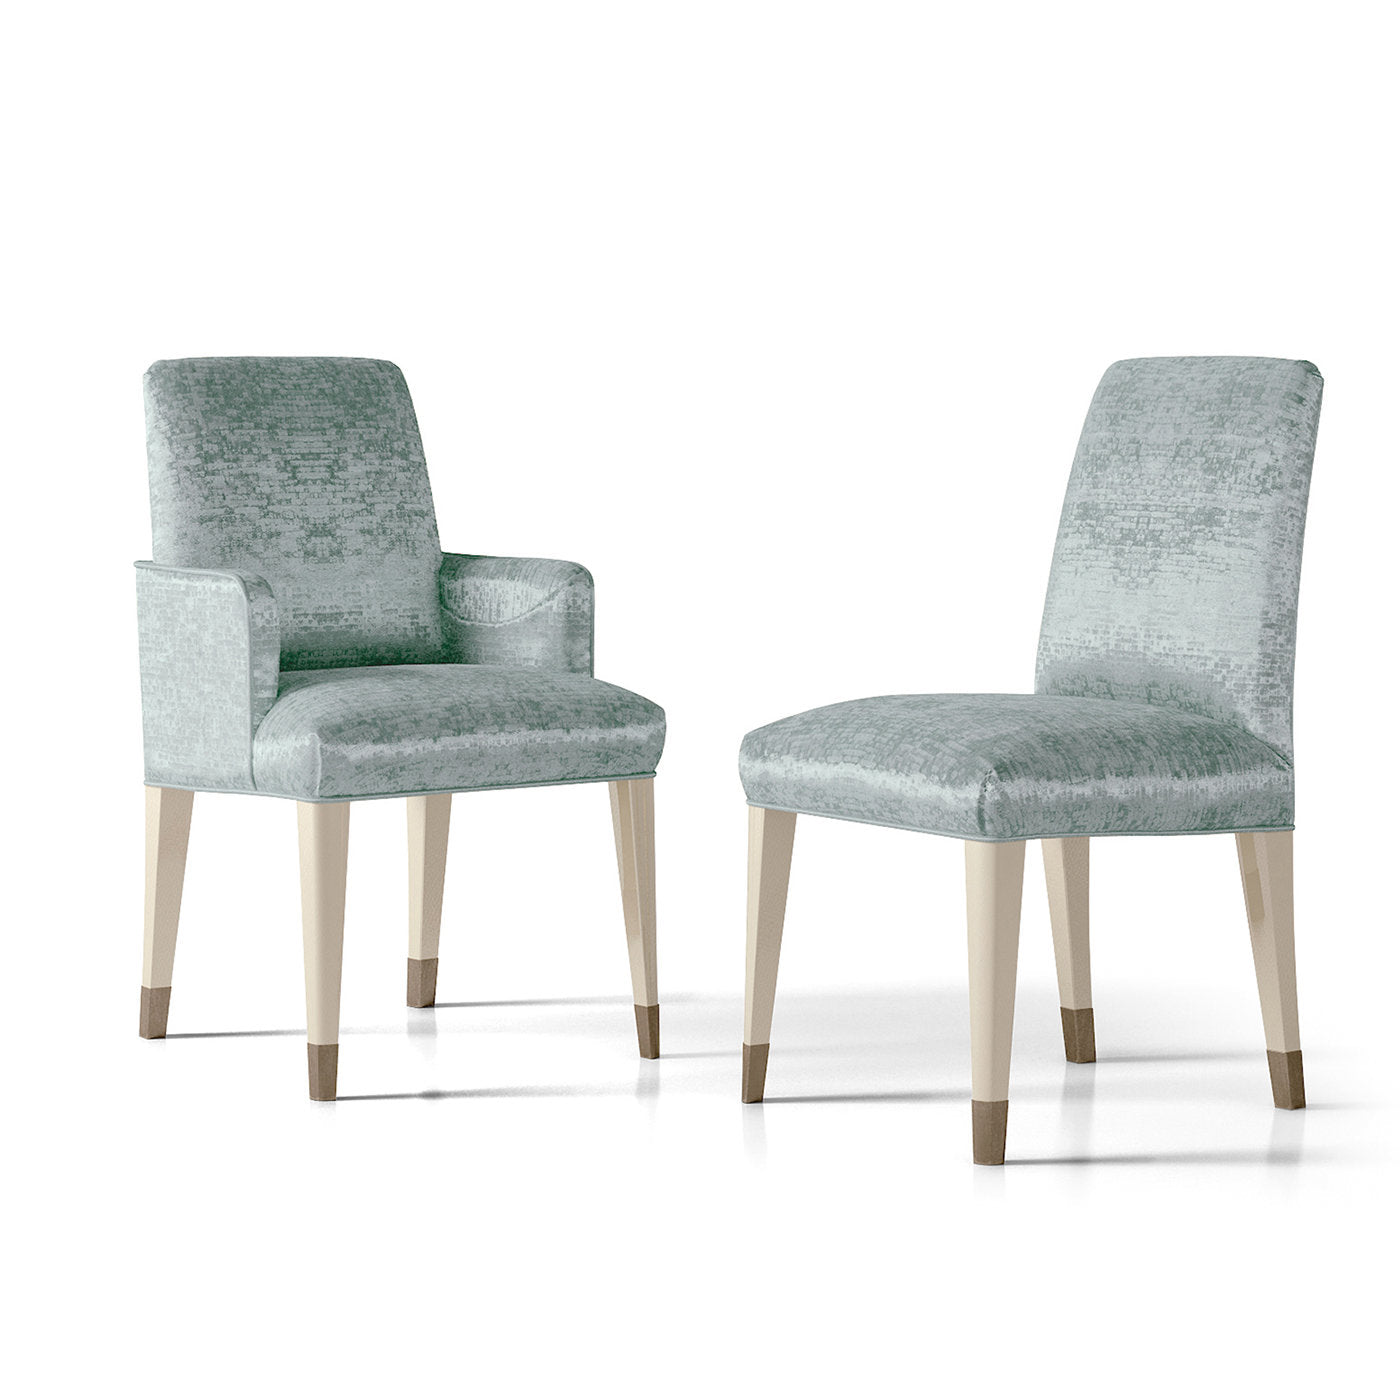 Holly Light Blue Dining chair #2 - Alternative view 1